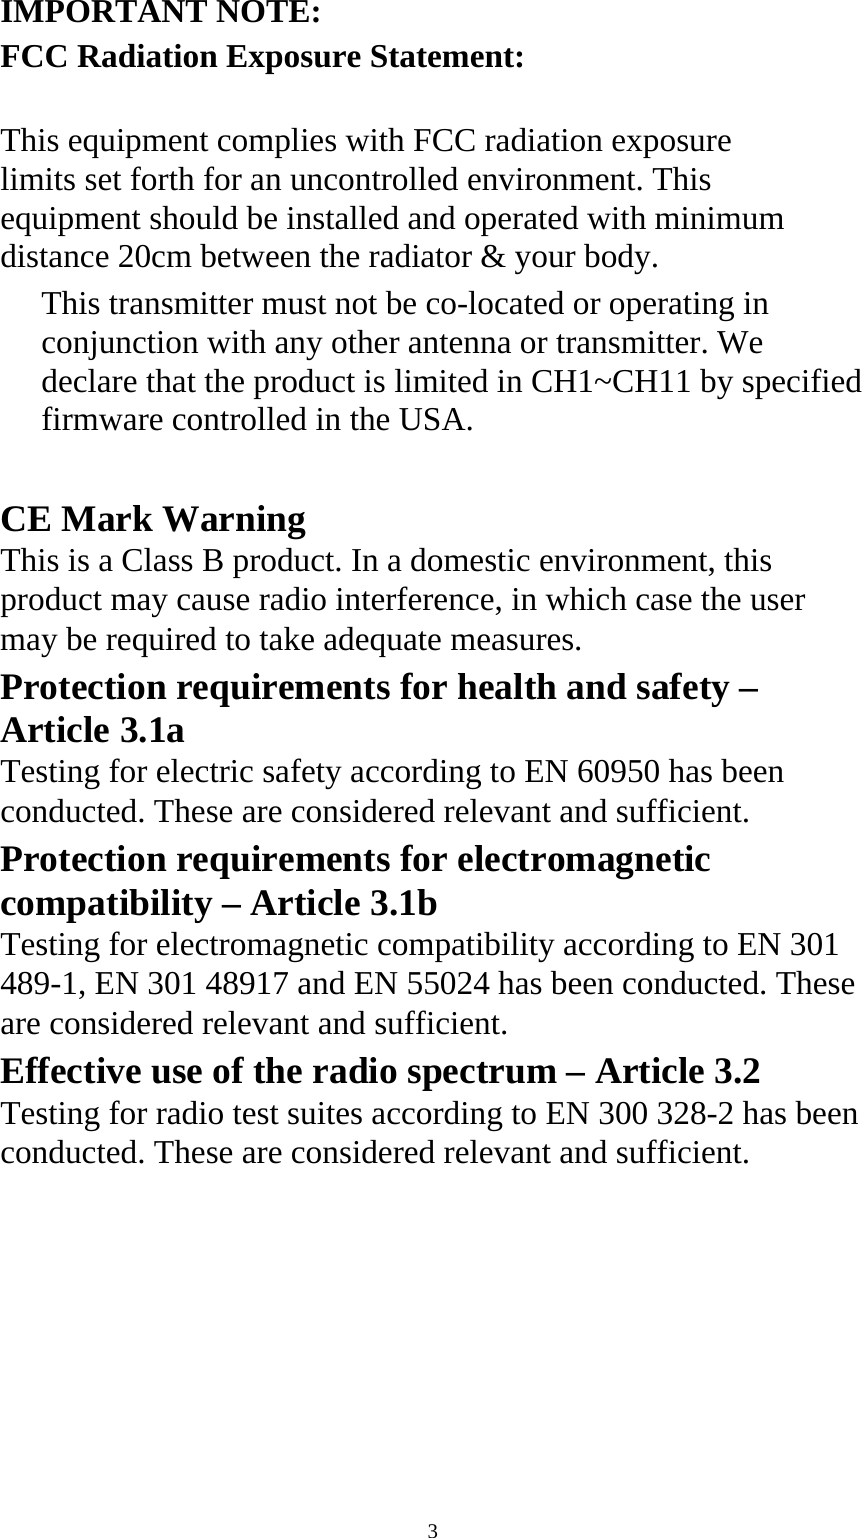  3IMPORTANT NOTE: FCC Radiation Exposure Statement:  This equipment complies with FCC radiation exposure limits set forth for an uncontrolled environment. This equipment should be installed and operated with minimum distance 20cm between the radiator &amp; your body.   This transmitter must not be co-located or operating in conjunction with any other antenna or transmitter. We declare that the product is limited in CH1~CH11 by specified firmware controlled in the USA.   CE Mark Warning   This is a Class B product. In a domestic environment, this product may cause radio interference, in which case the user may be required to take adequate measures.   Protection requirements for health and safety – Article 3.1a   Testing for electric safety according to EN 60950 has been conducted. These are considered relevant and sufficient.   Protection requirements for electromagnetic compatibility – Article 3.1b   Testing for electromagnetic compatibility according to EN 301 489-1, EN 301 48917 and EN 55024 has been conducted. These are considered relevant and sufficient.   Effective use of the radio spectrum – Article 3.2   Testing for radio test suites according to EN 300 328-2 has been conducted. These are considered relevant and sufficient.   